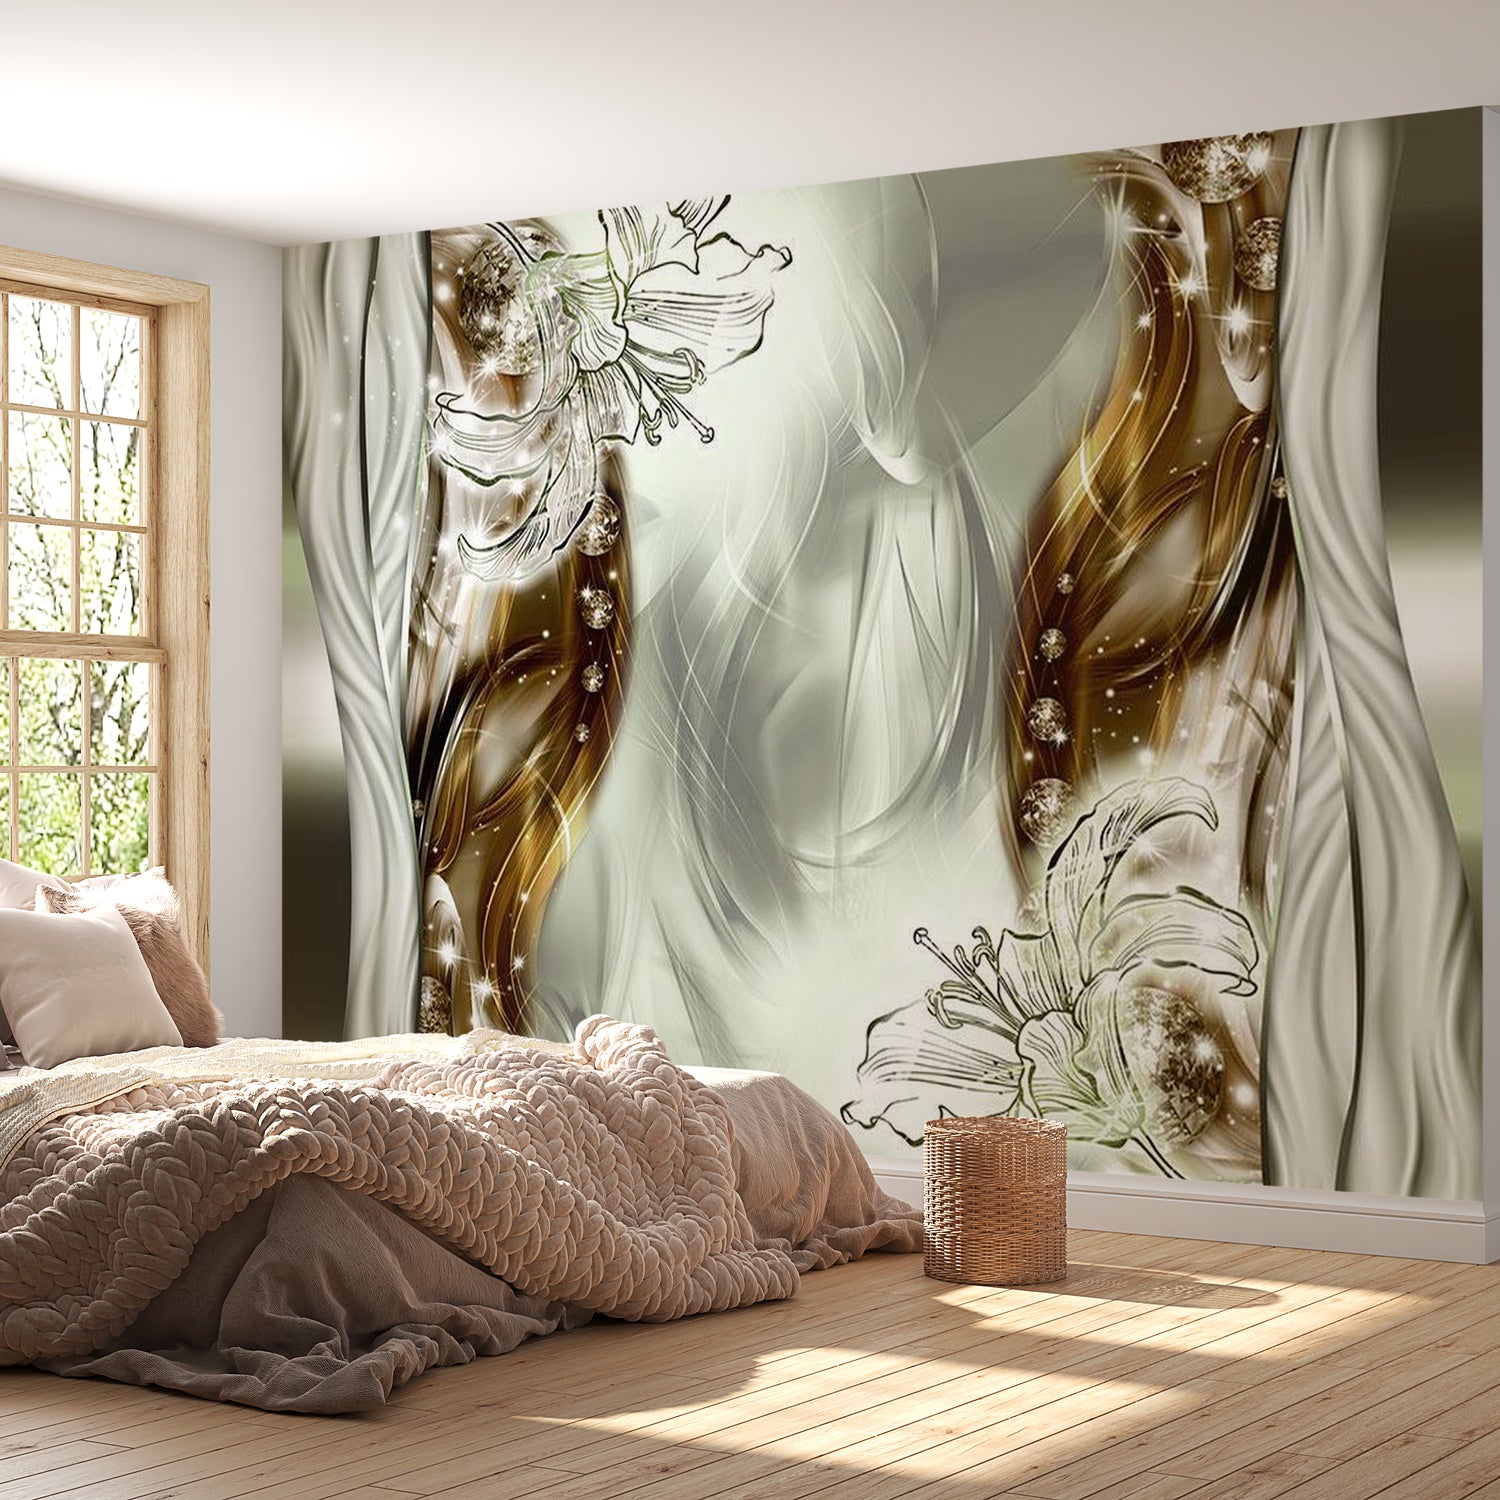 Peel & Stick Floral Wall Mural - Sensual Stream - Removable Wall Decals